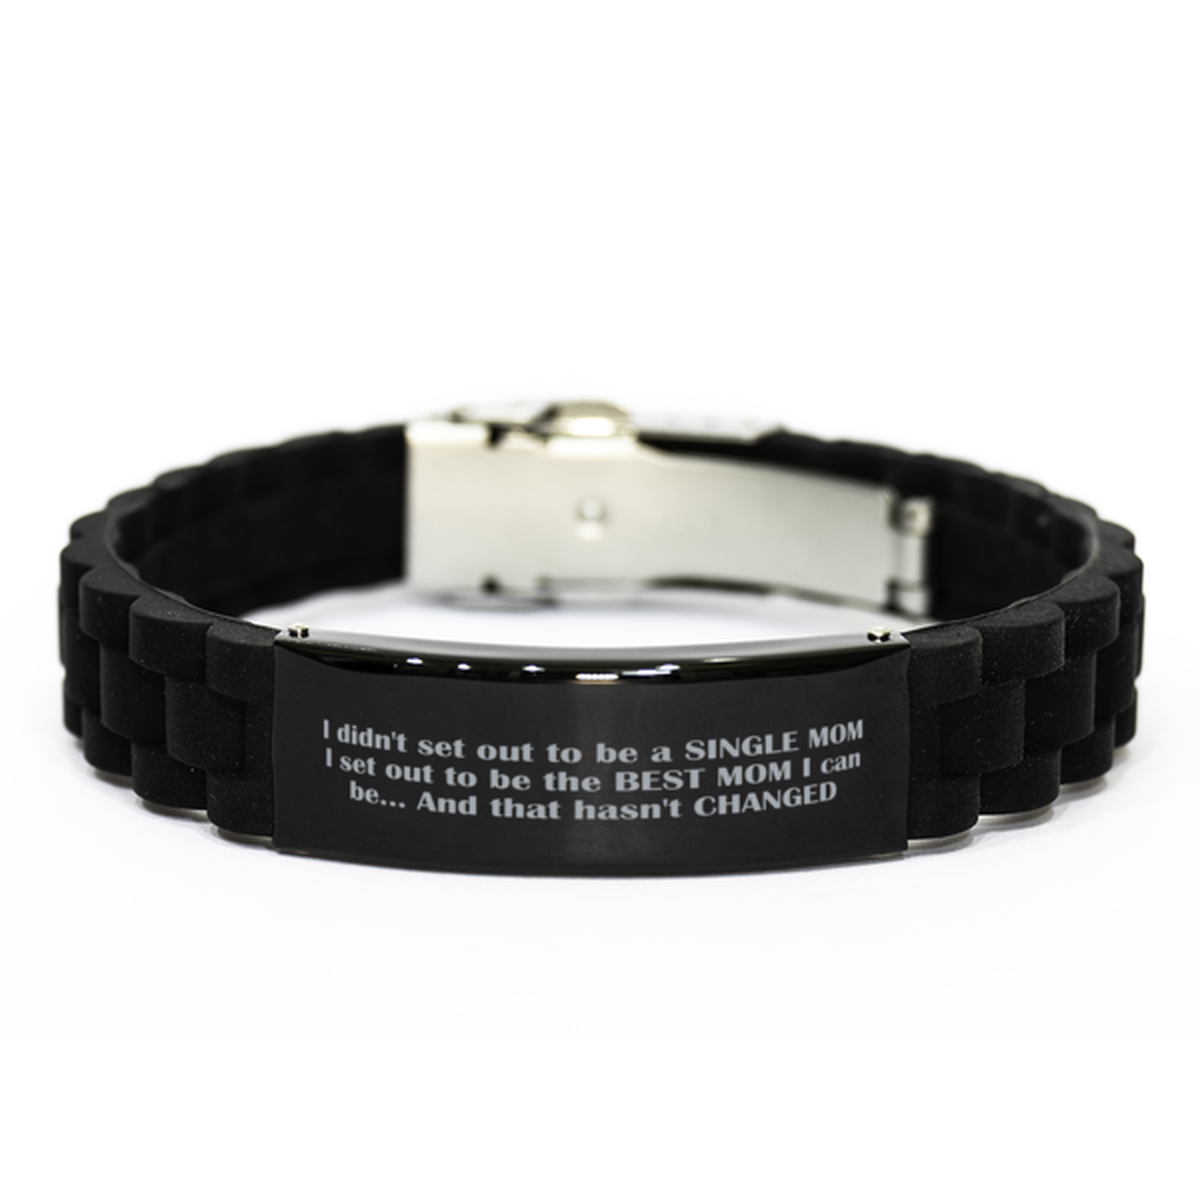 To My Single Mom Black Bracelet, To Be The Best Mom, Mothers Day Gifts For Single Mom From Friends, Birthday Gifts For Women